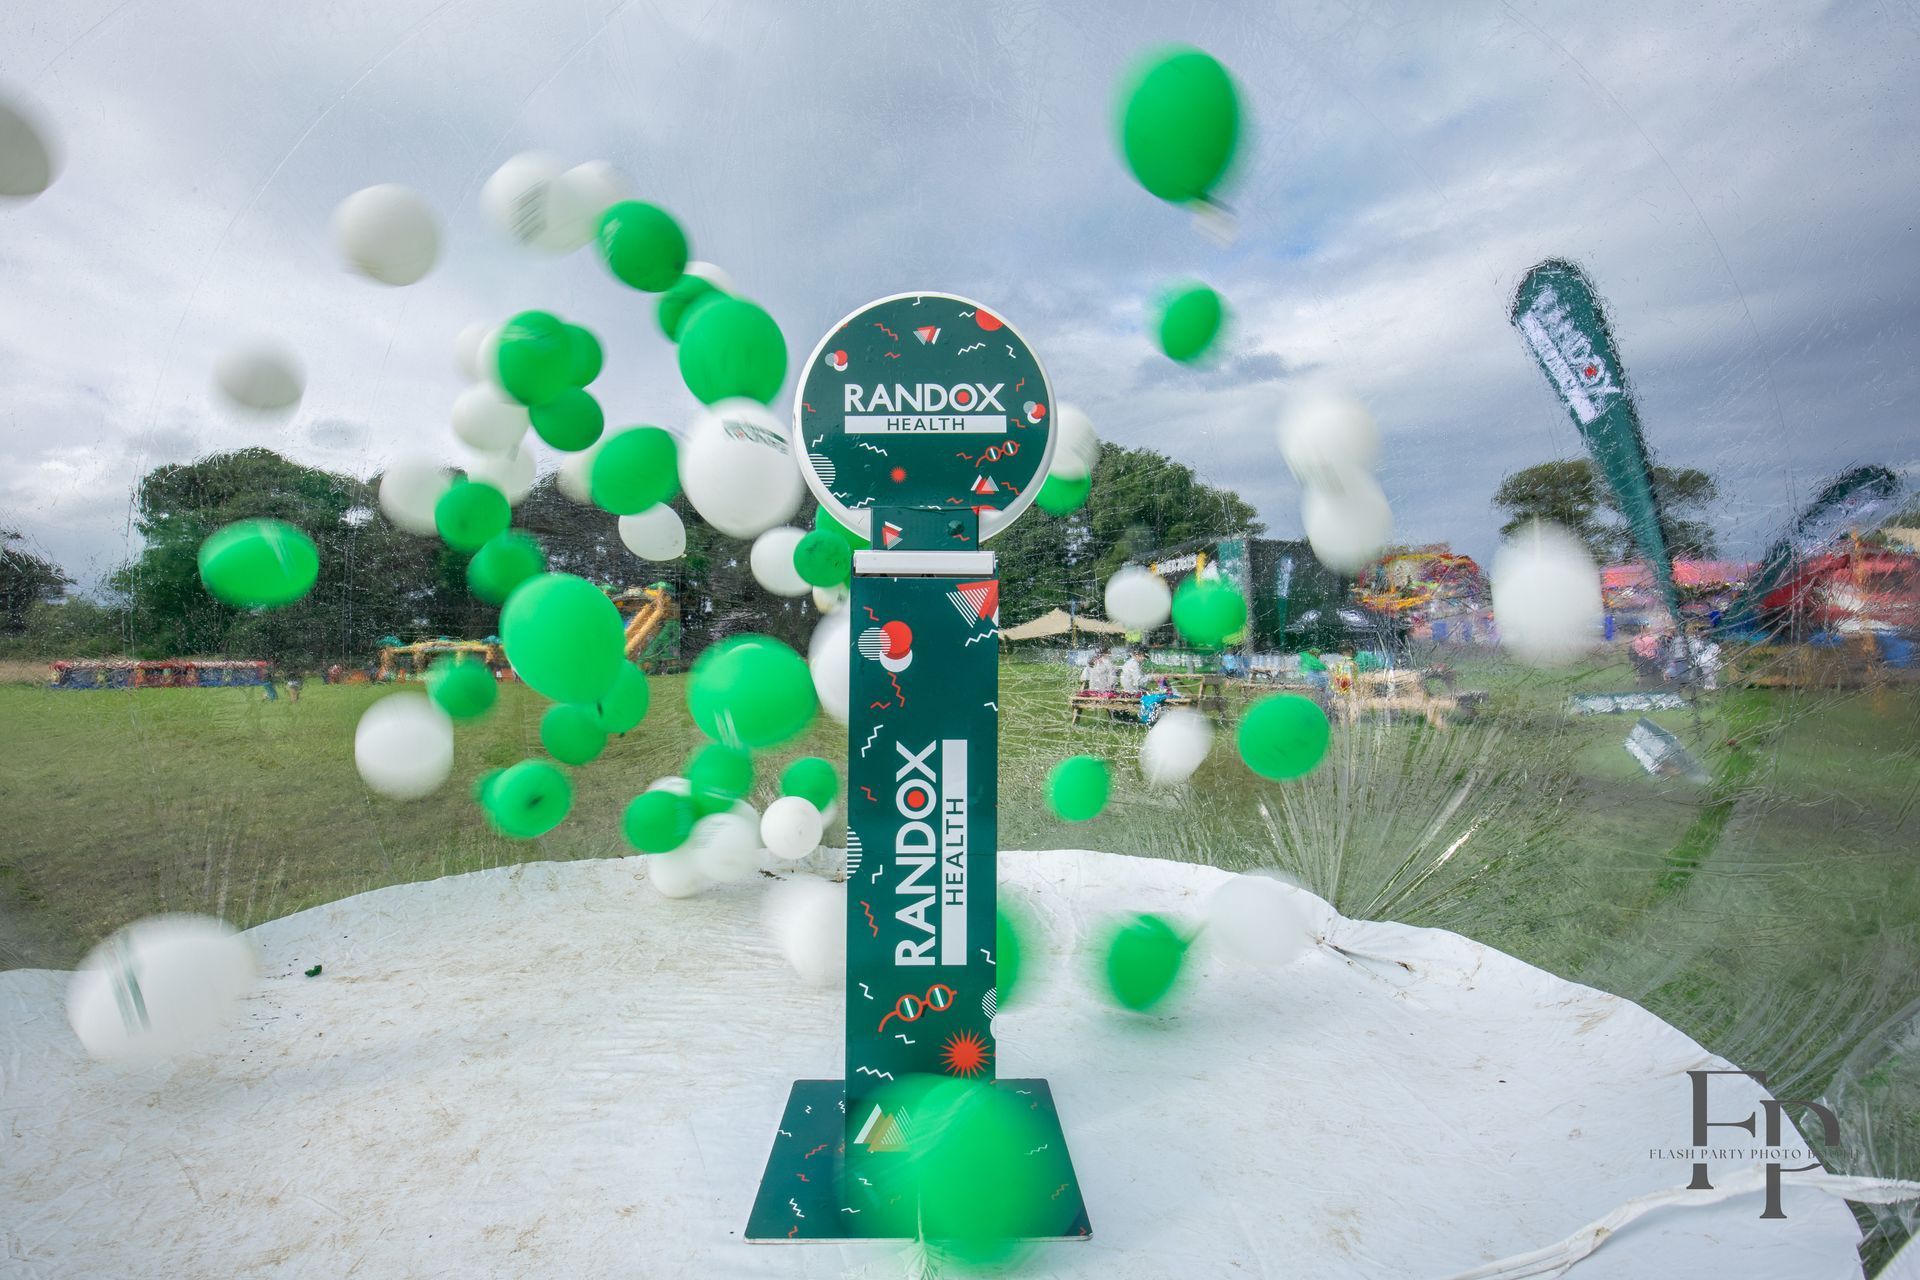 Selfie Photo Booth set up outdoors with green and white balloons in the air.